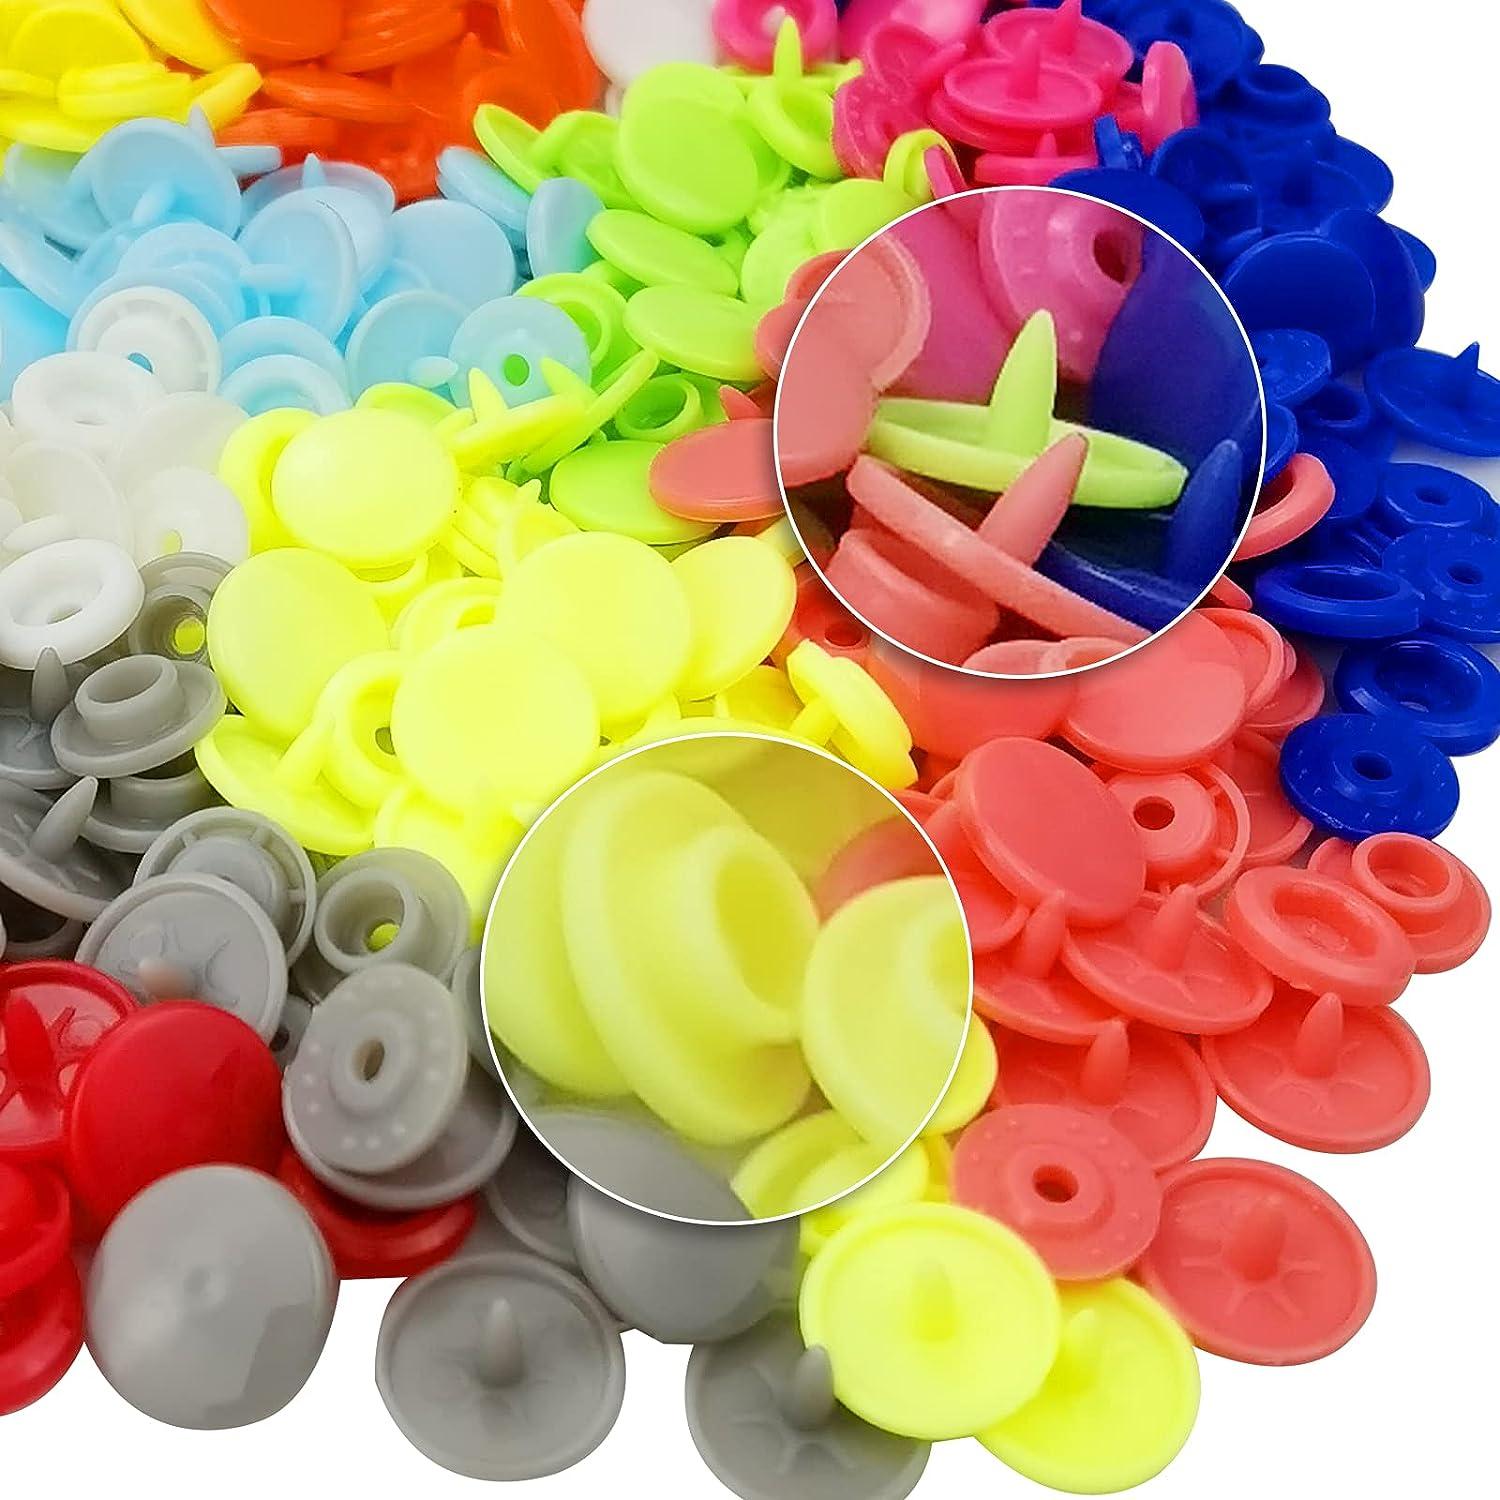 TmppDeco Plastic Snaps with Snap Pliers 460 Sets 24-Colors Snap Buttons for  Sewing Snap Fasteners Kit for Sewing Clothing Crafting